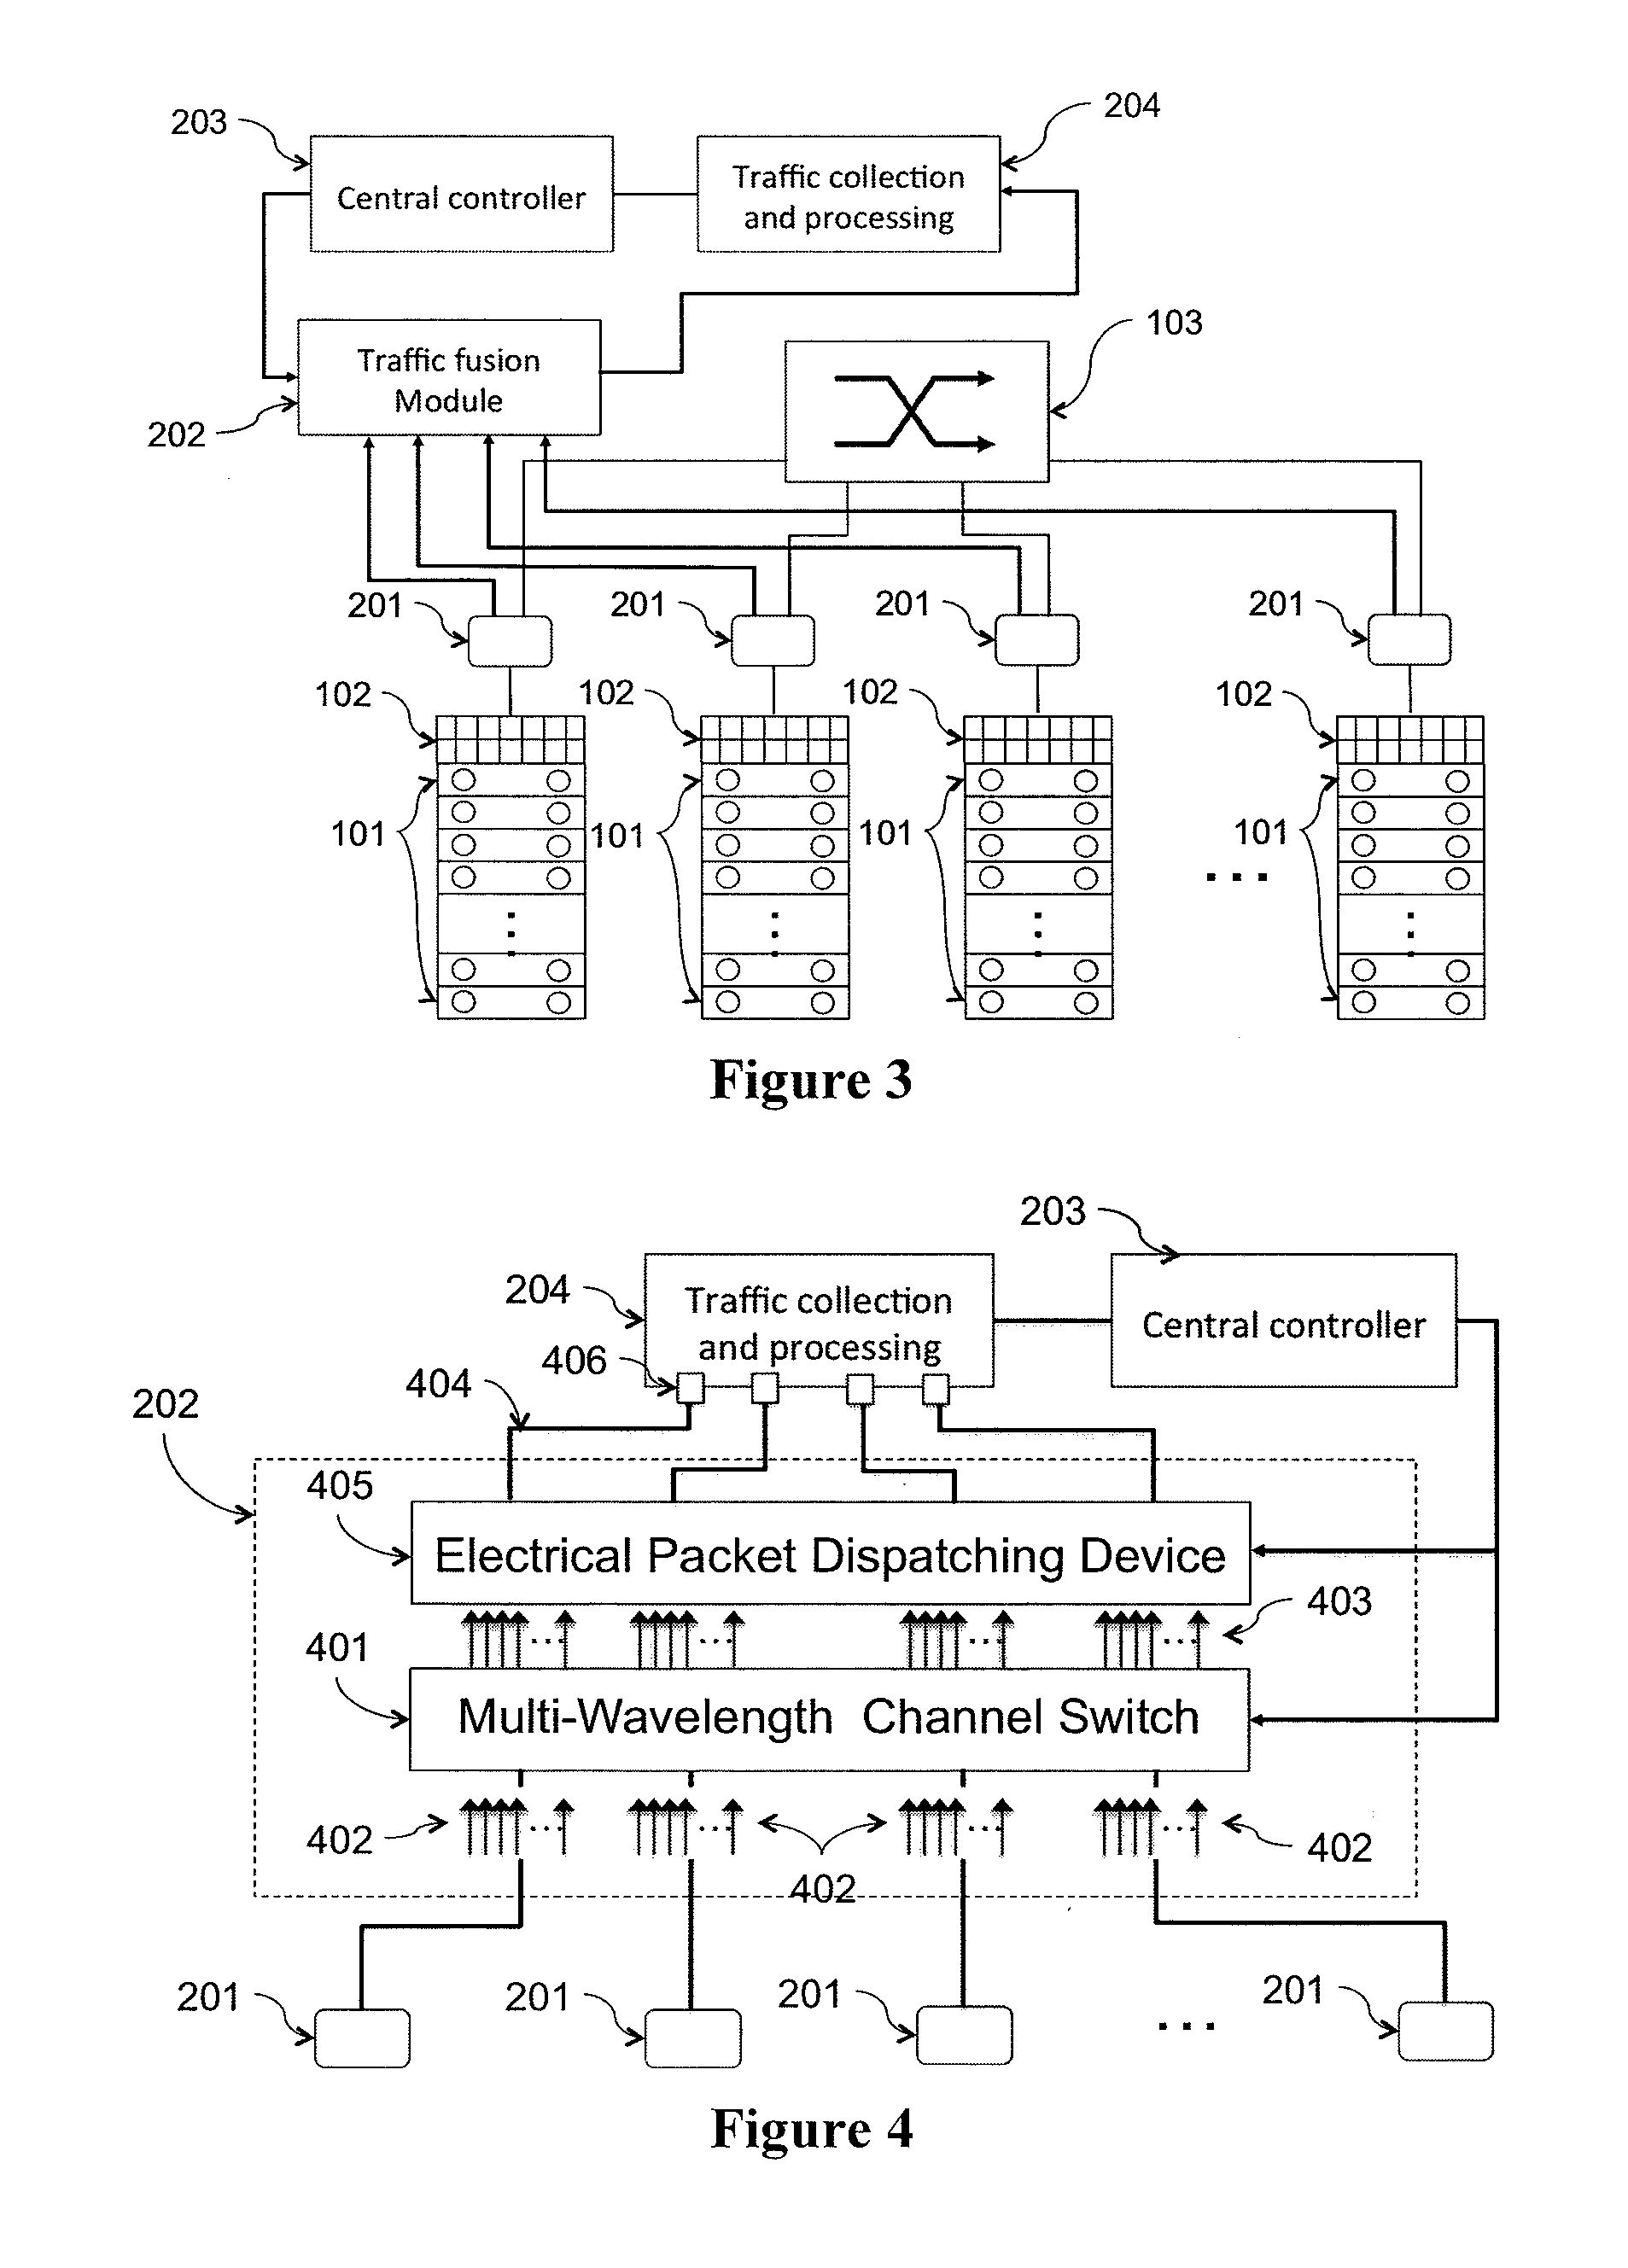 High-Throughput Network Traffic Monitoring through Optical Circuit Switching and Broadcast-and-Select Communications